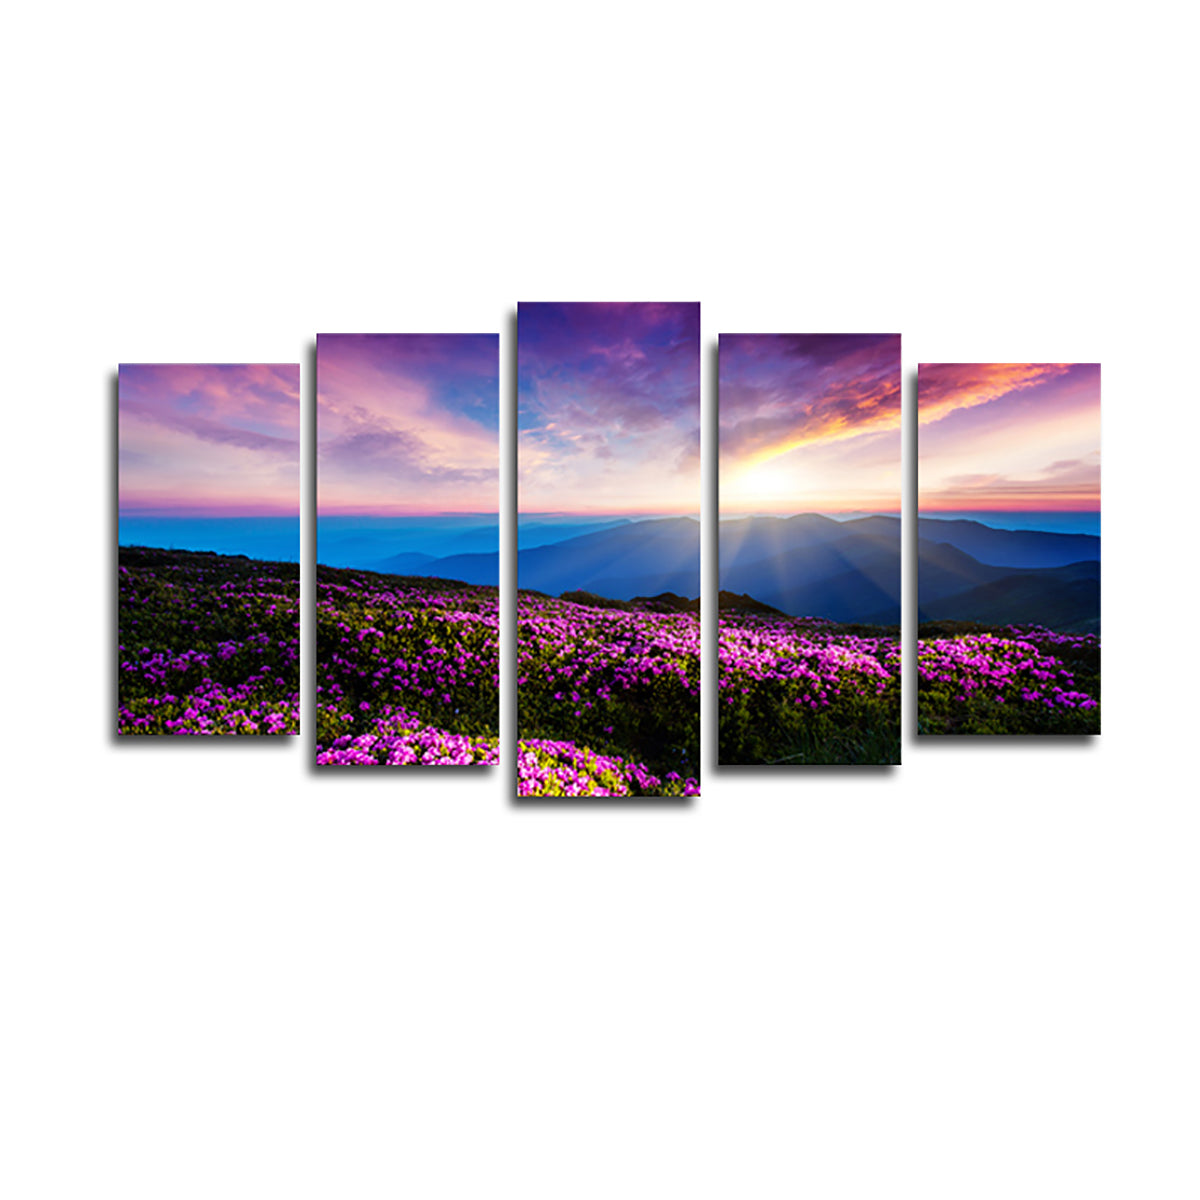 "Set of 5 Canvas Print Scenery Oil Paintings for Wall Decor, Frameless Artwork for Kids Room, Home and Office Decoration"